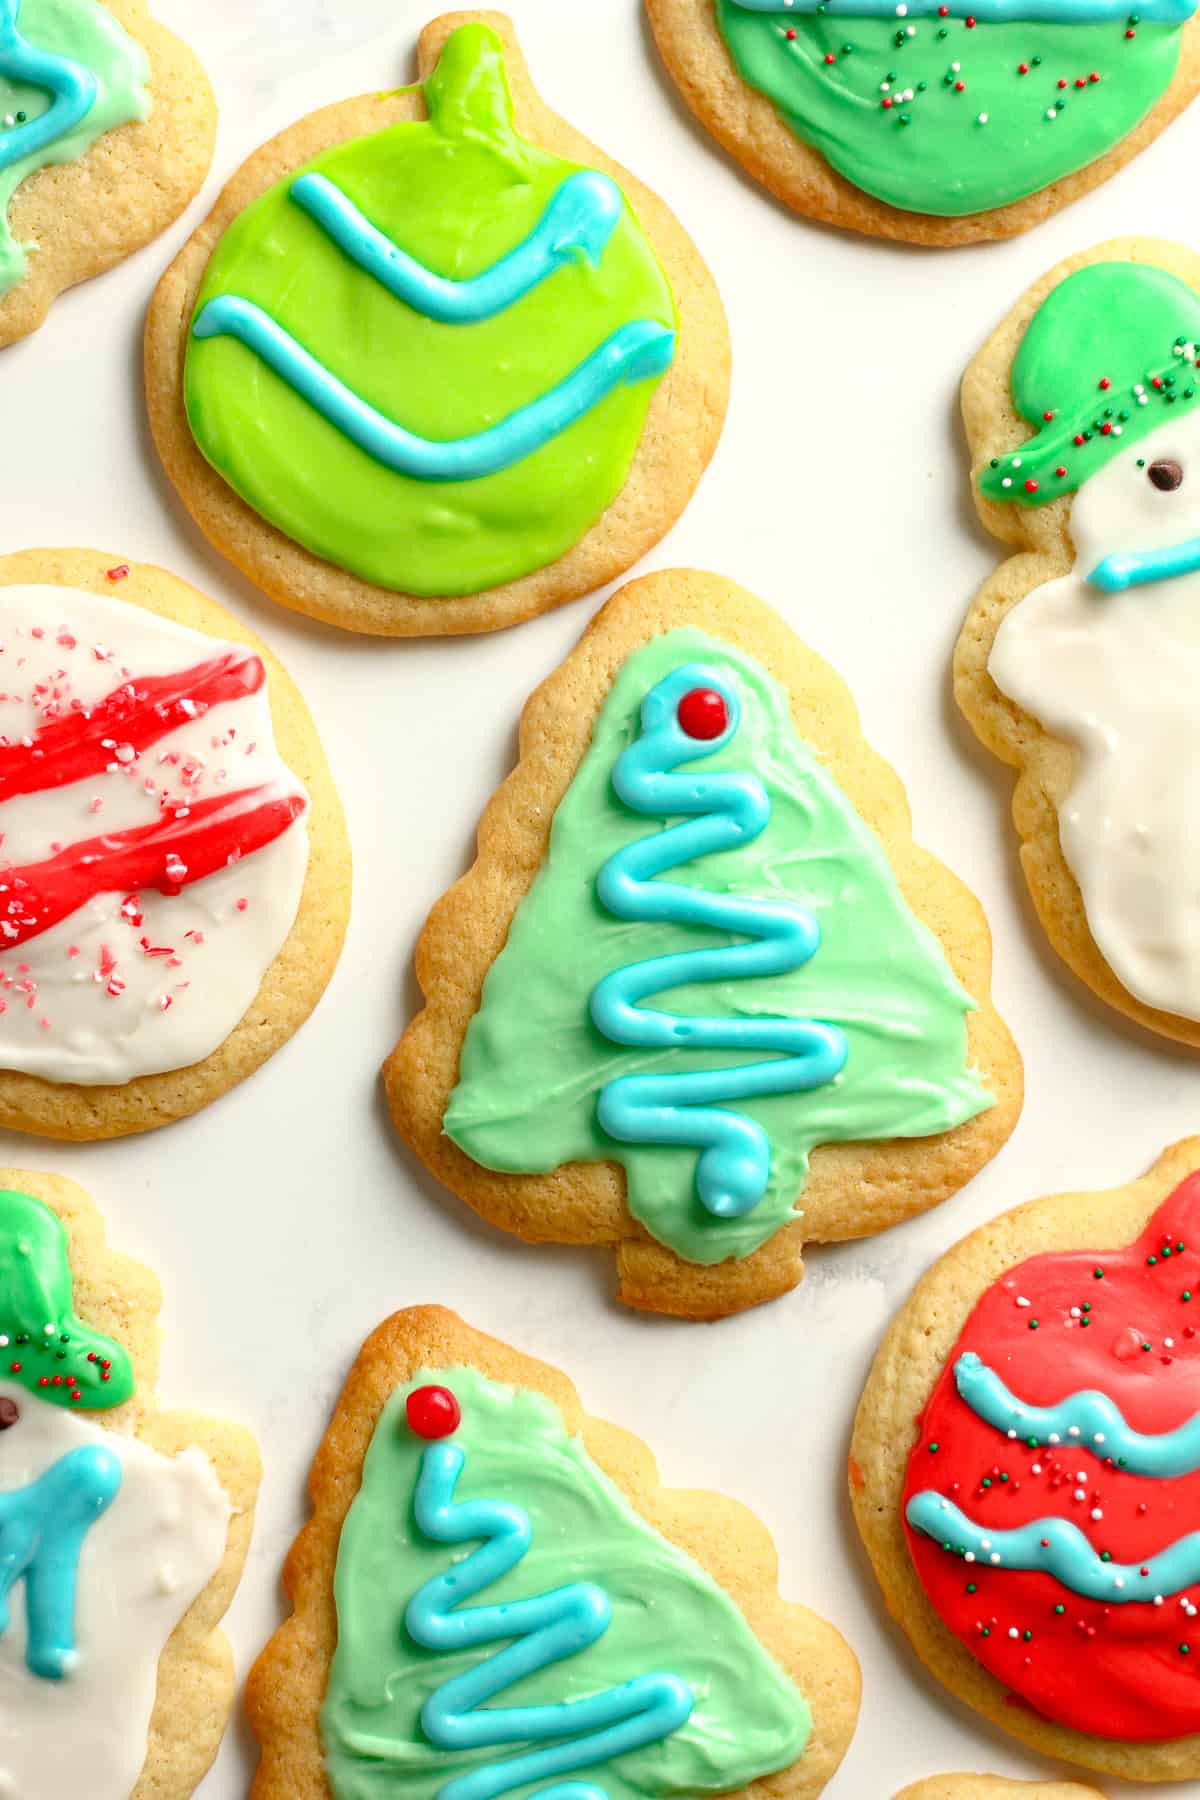 Closeup on some decorated sugar cookies.